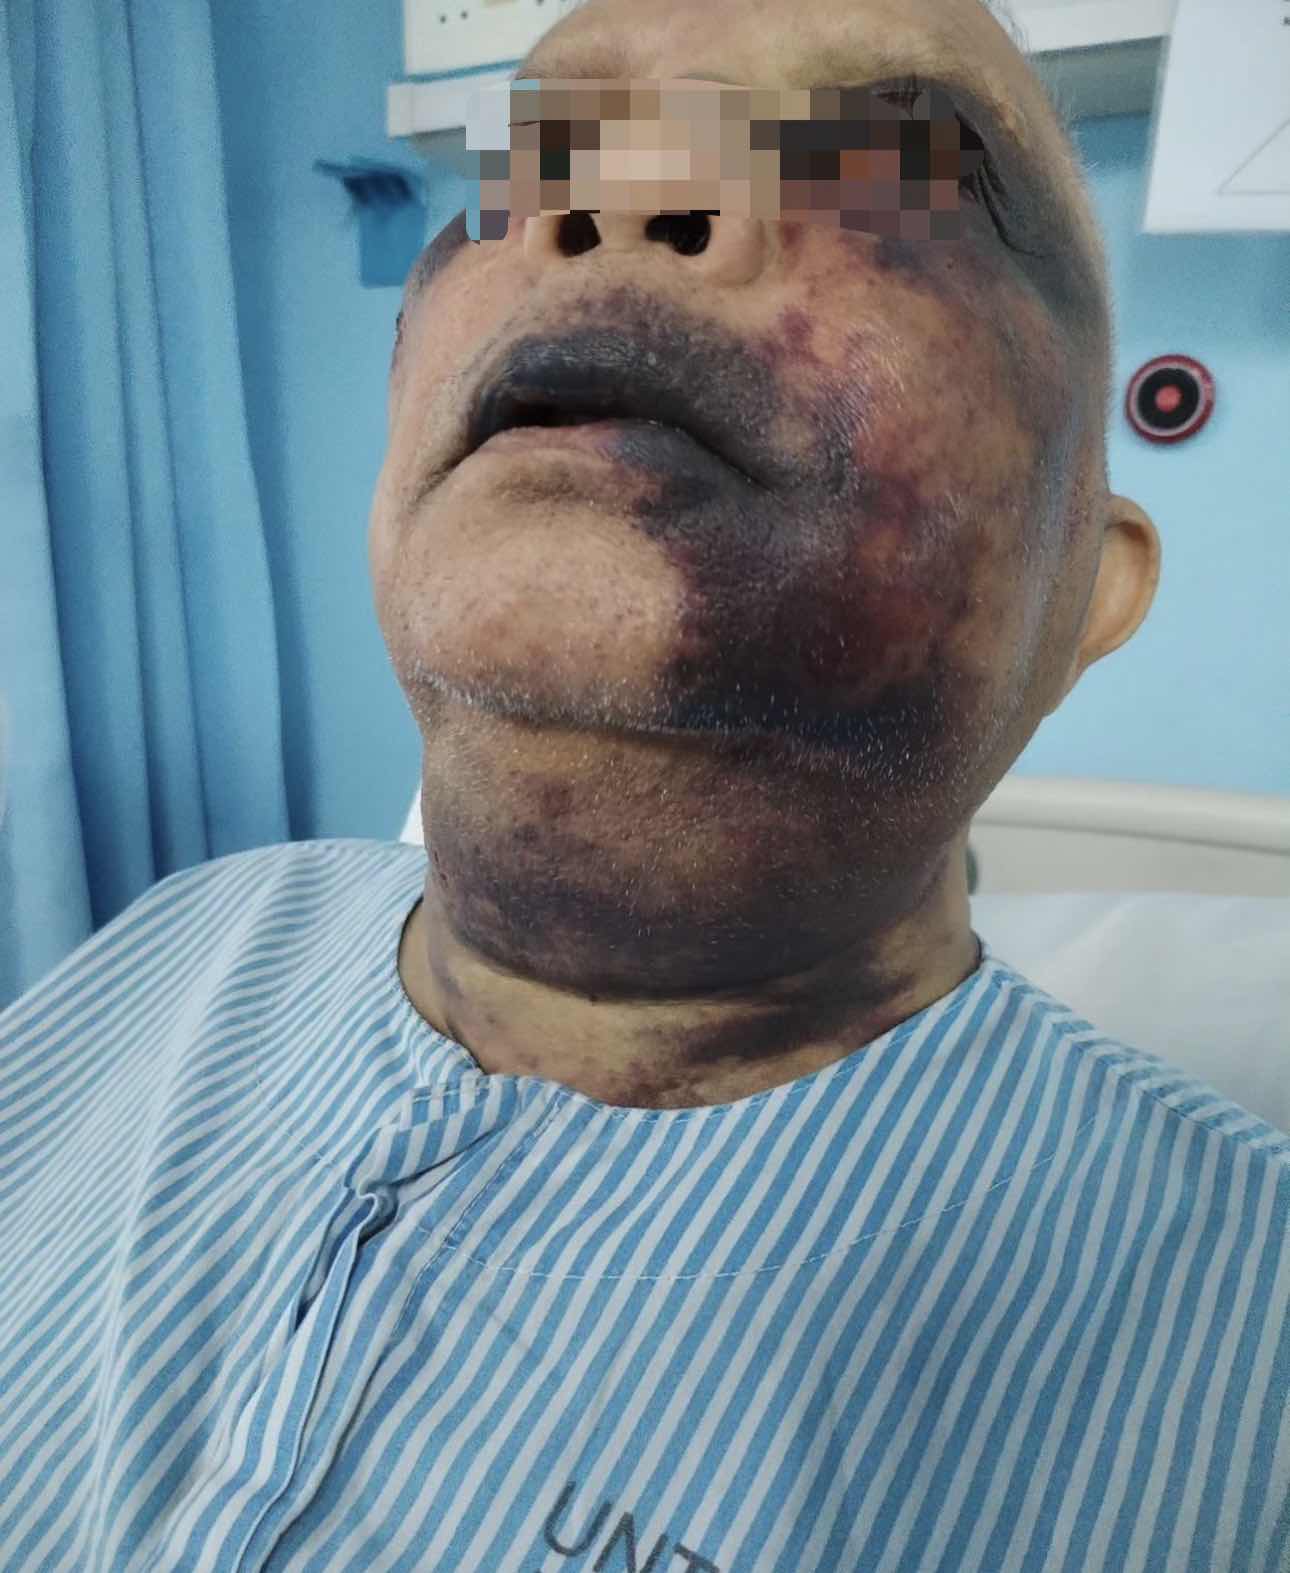 Elderly man with horrible scars and injuries